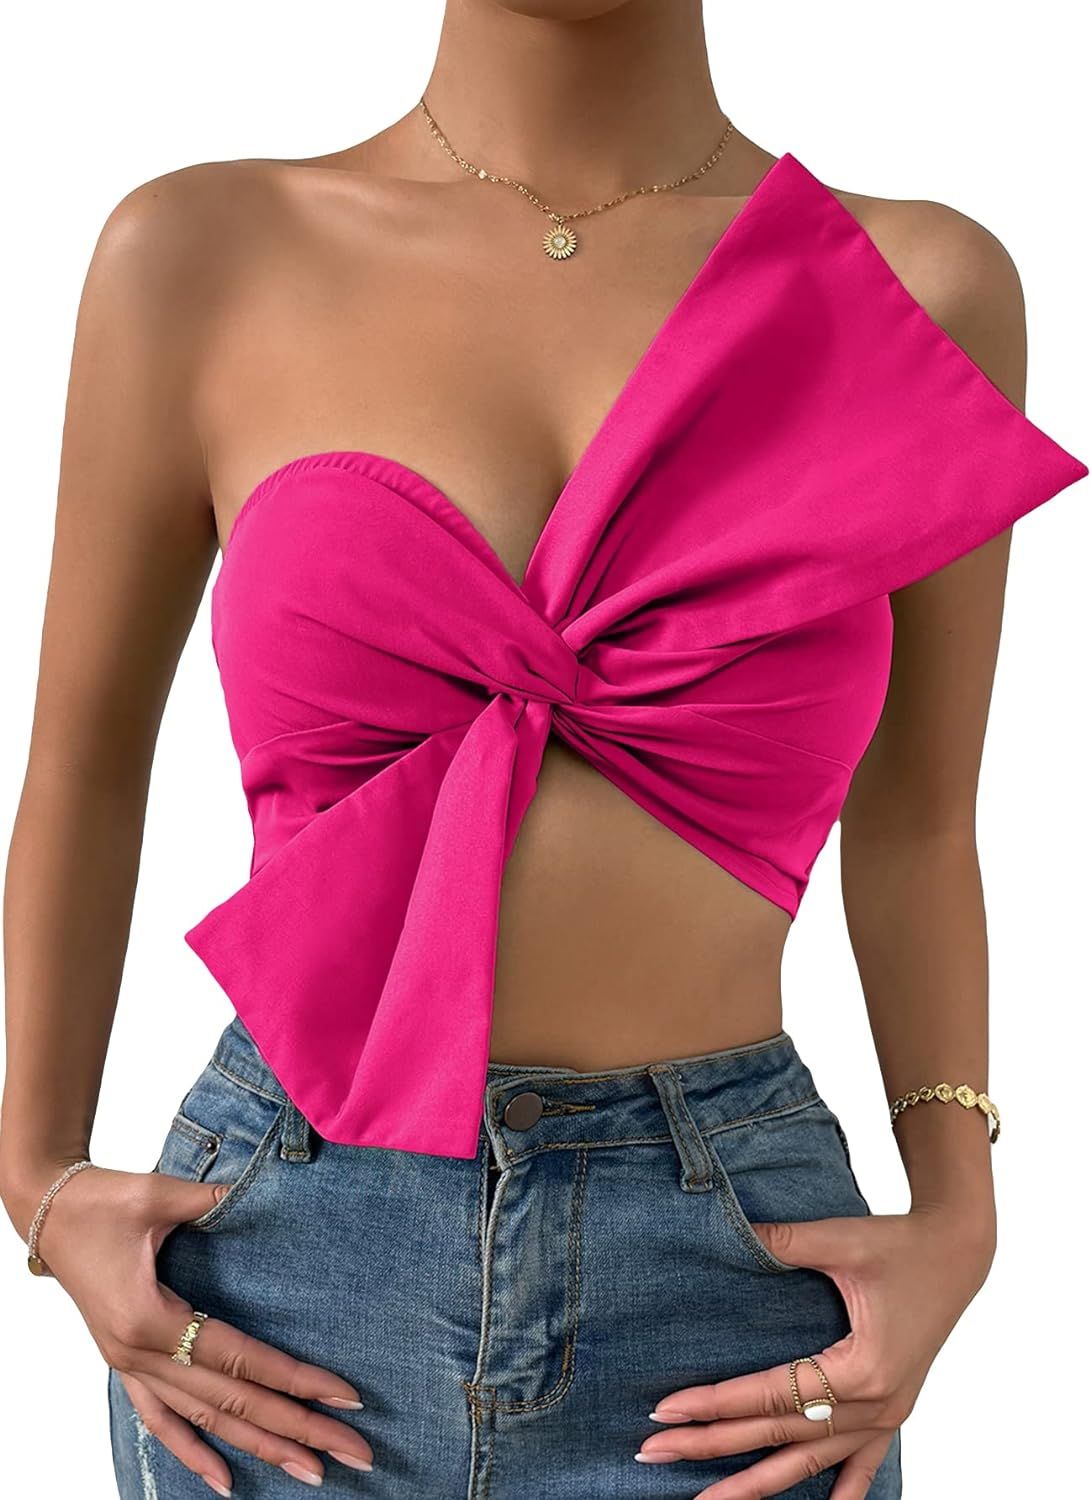 OYOANGLE Women's Twist Bow Front Crop Tube Top Shirred Sleeveless Strapless Bandeau Tops Hot Pink... | Amazon (US)